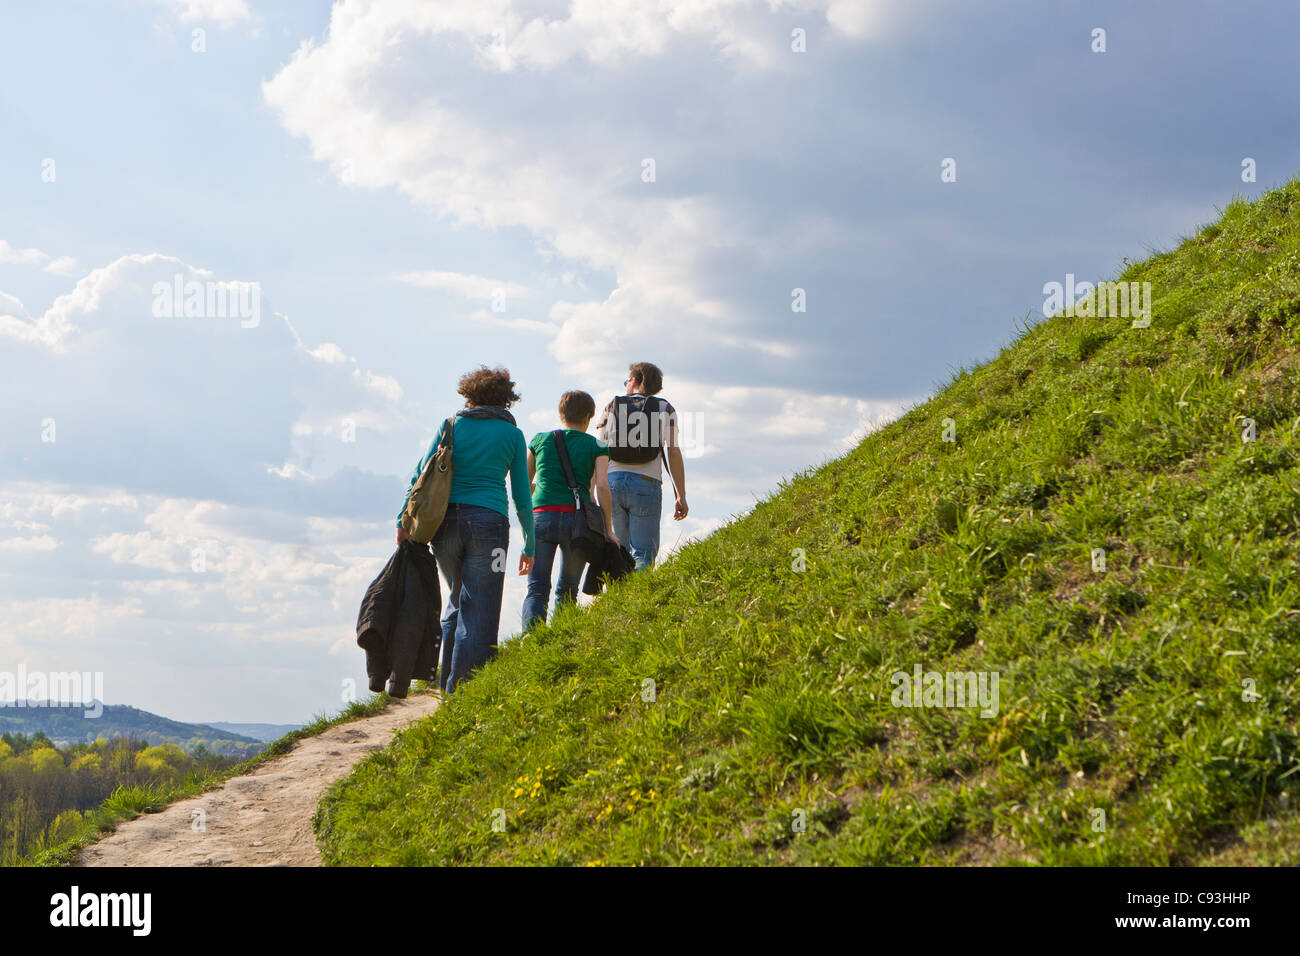 Three young people climb a grassy hill Stock Photo